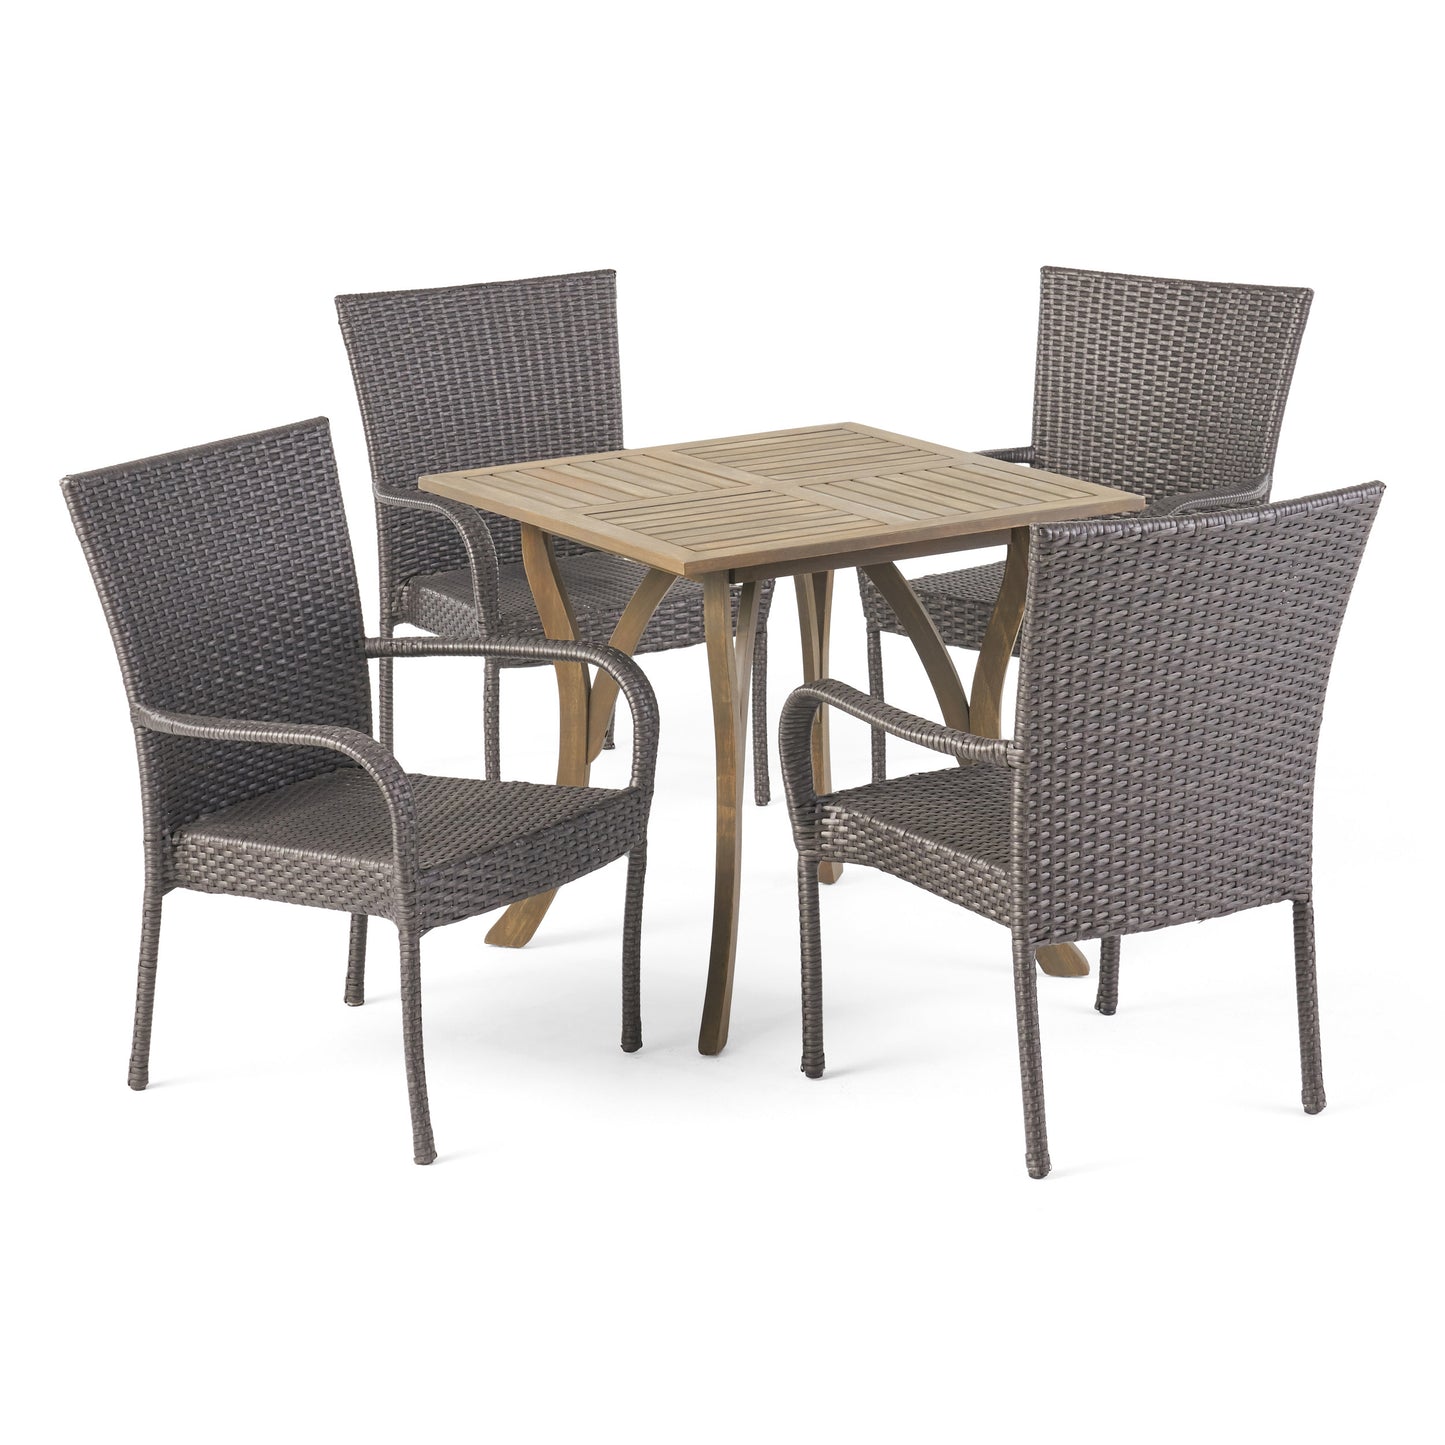 Lebeau Outdoor 5 Piece Acacia Wood/ Wicker Dining Set, Teak Finish and Multibrown